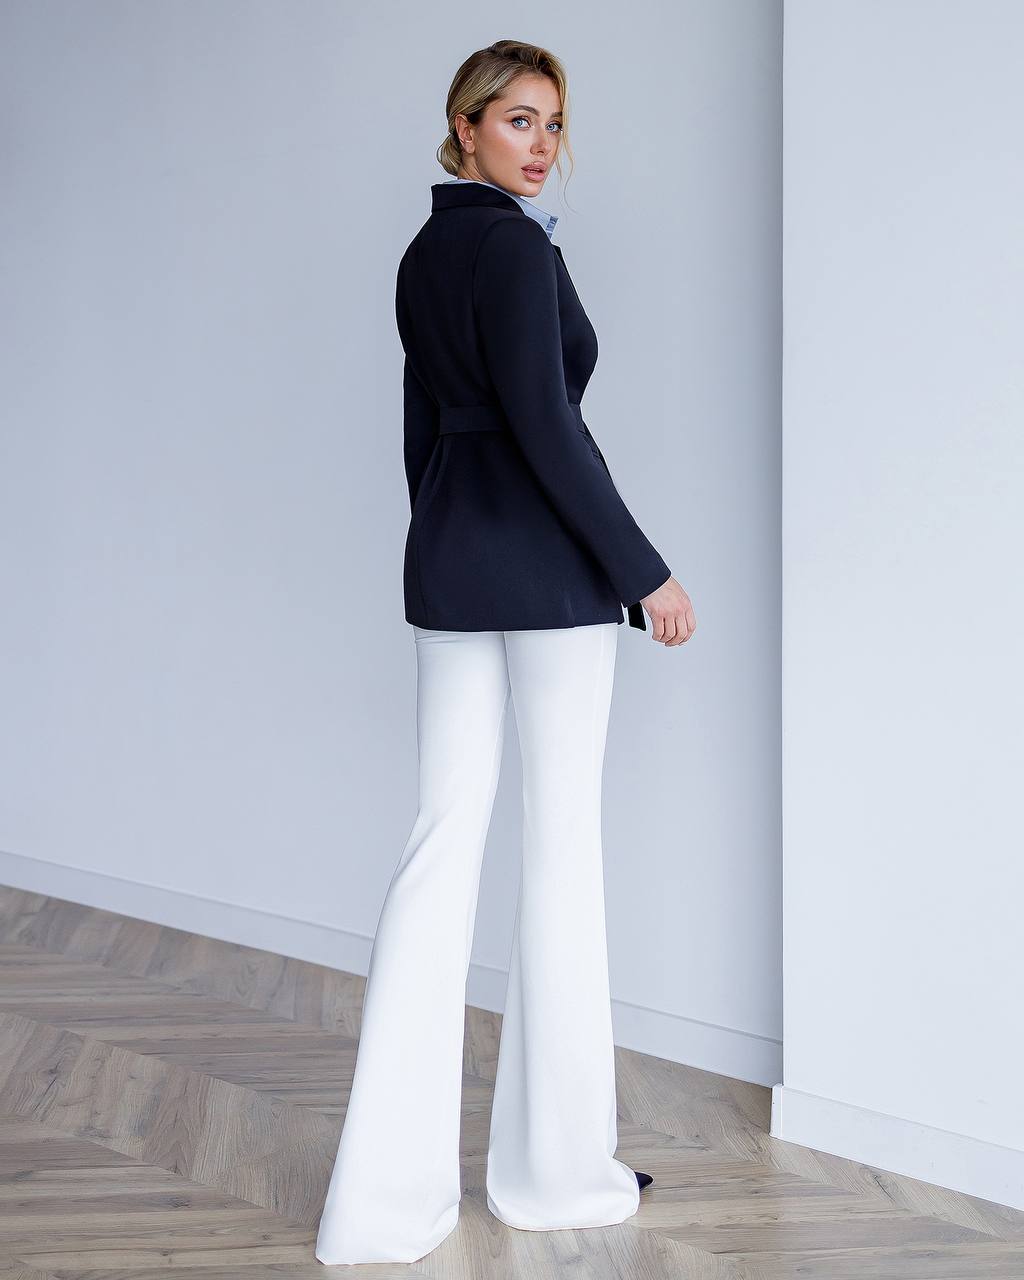 a woman in a black jacket and white pants